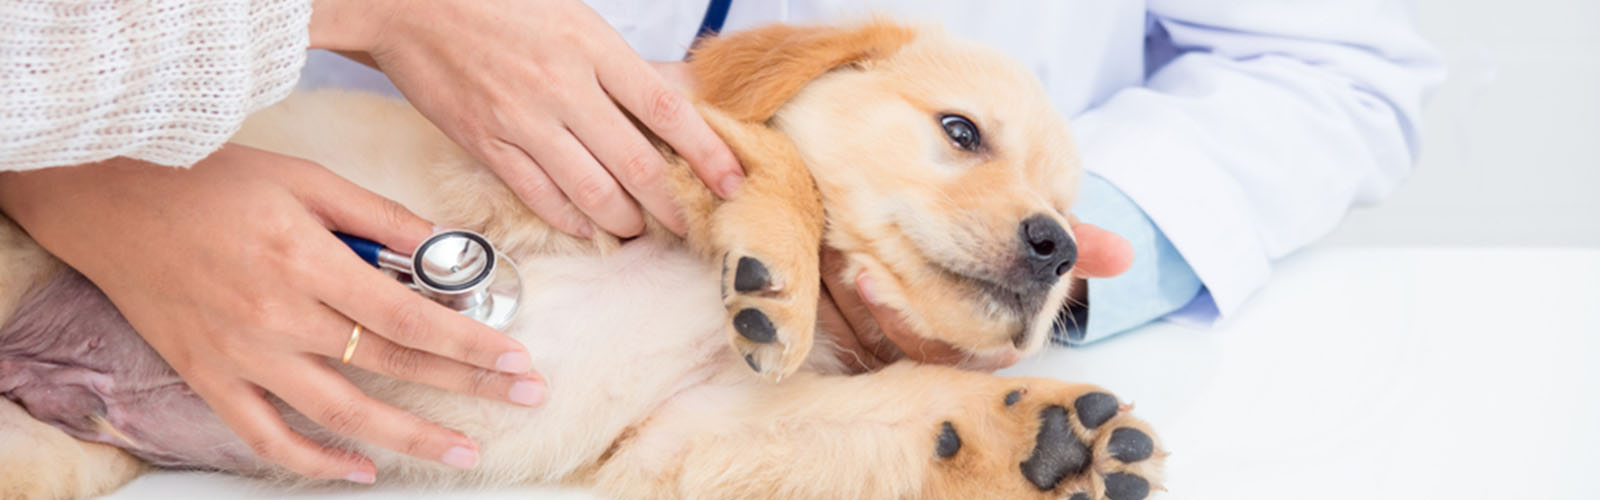 New Patients Welcome! » Companion Care Veterinary Clinic | Companion Care  Veterinary Clinic